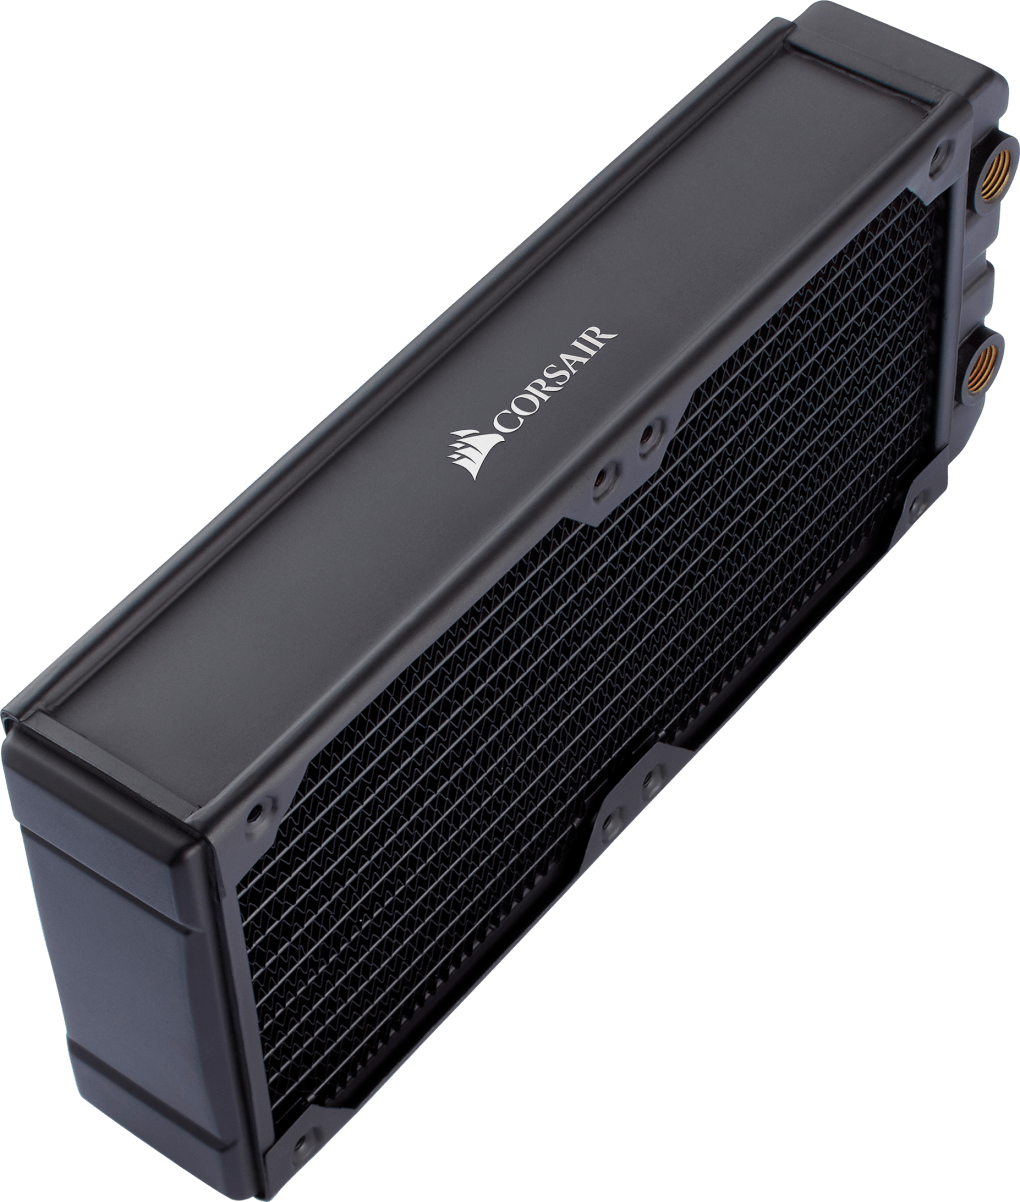 Hydro X Series XR7 240mm Water Cooling Radiator